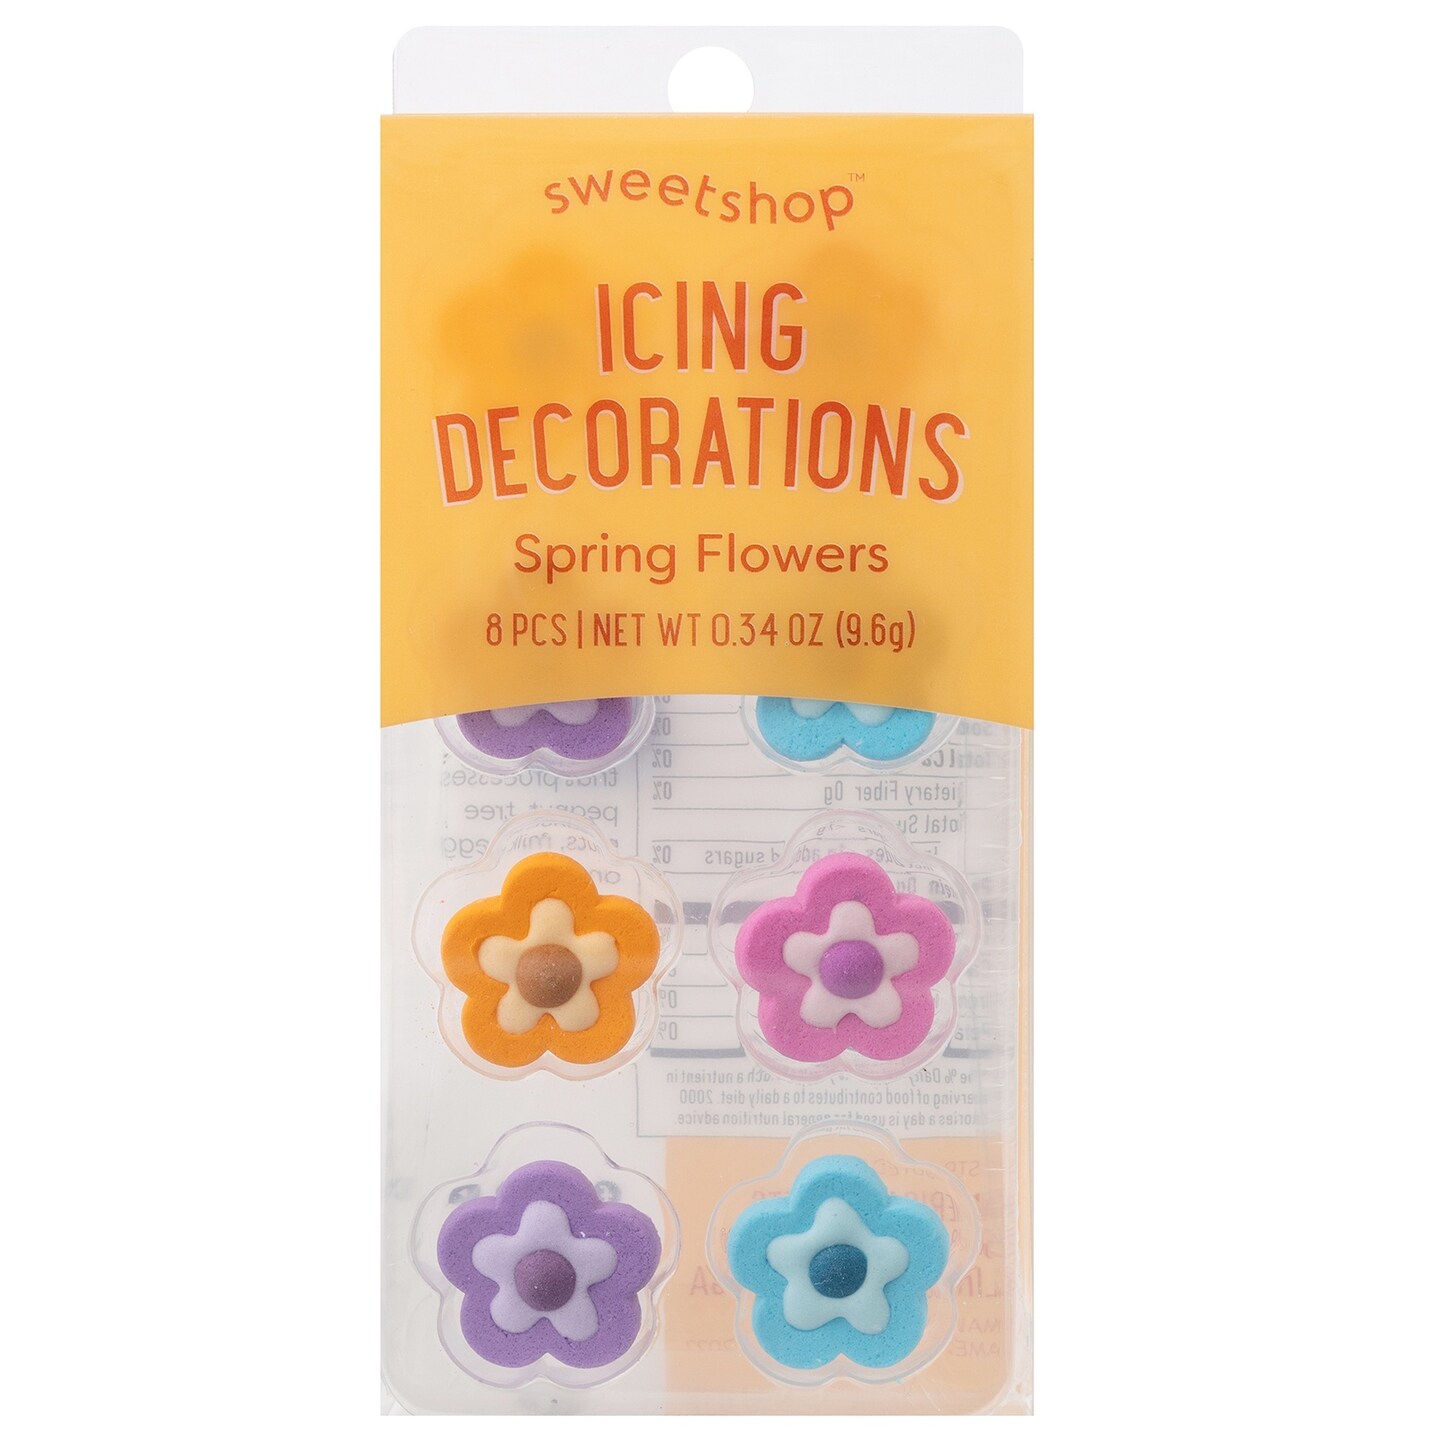 Sweetshop Icing Decorations-Spring Flowers, 8 Pieces